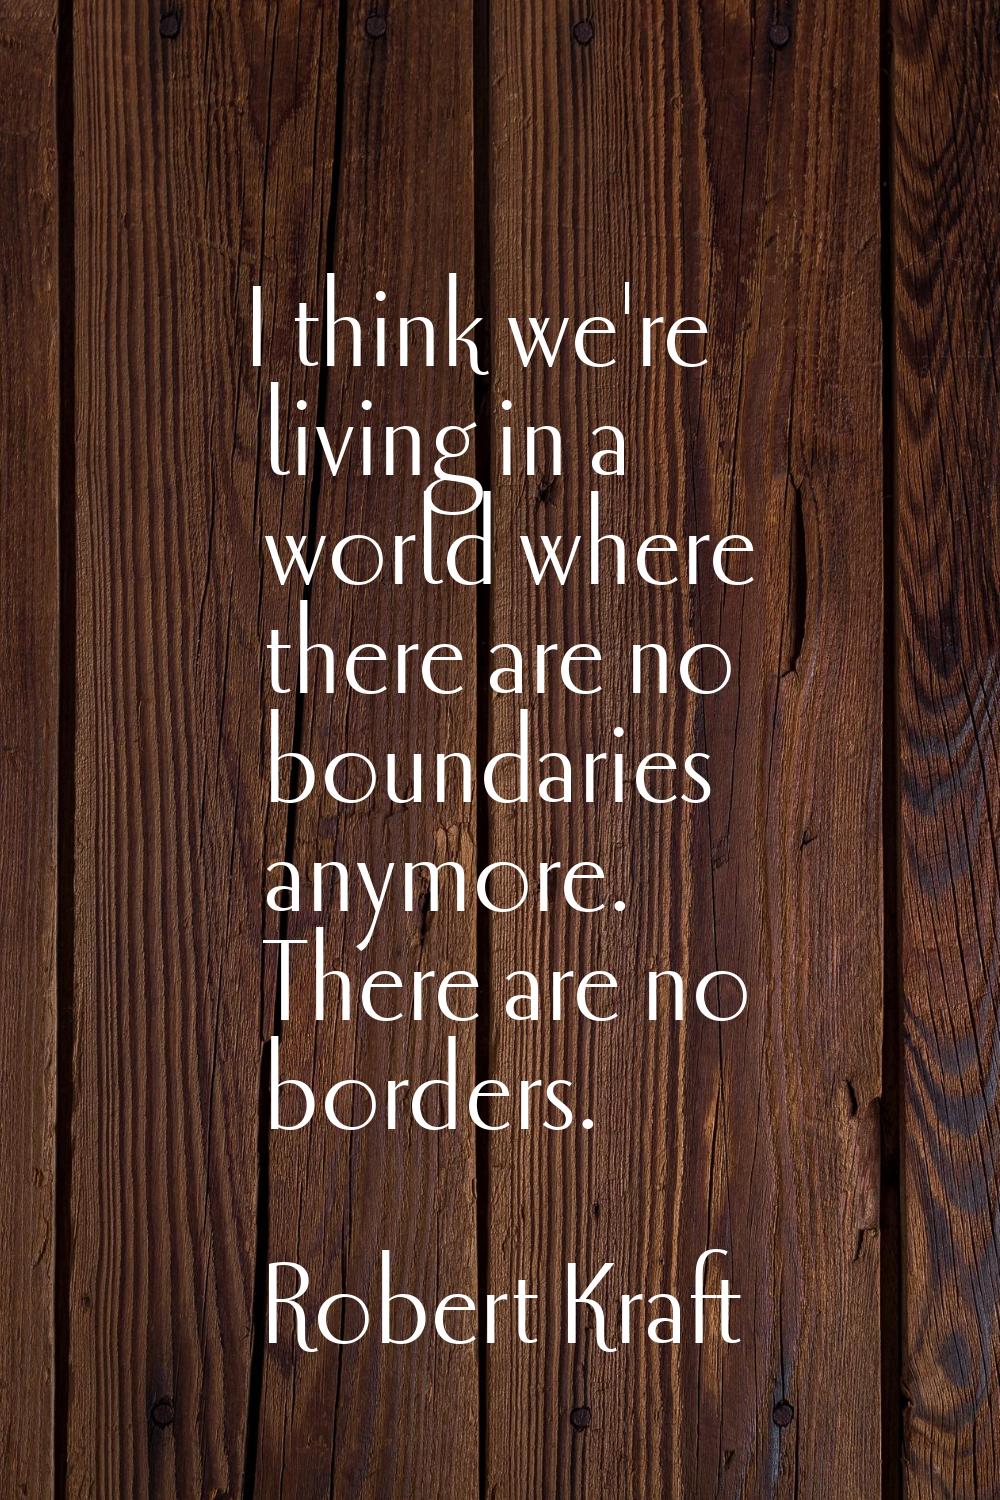 I think we're living in a world where there are no boundaries anymore. There are no borders.